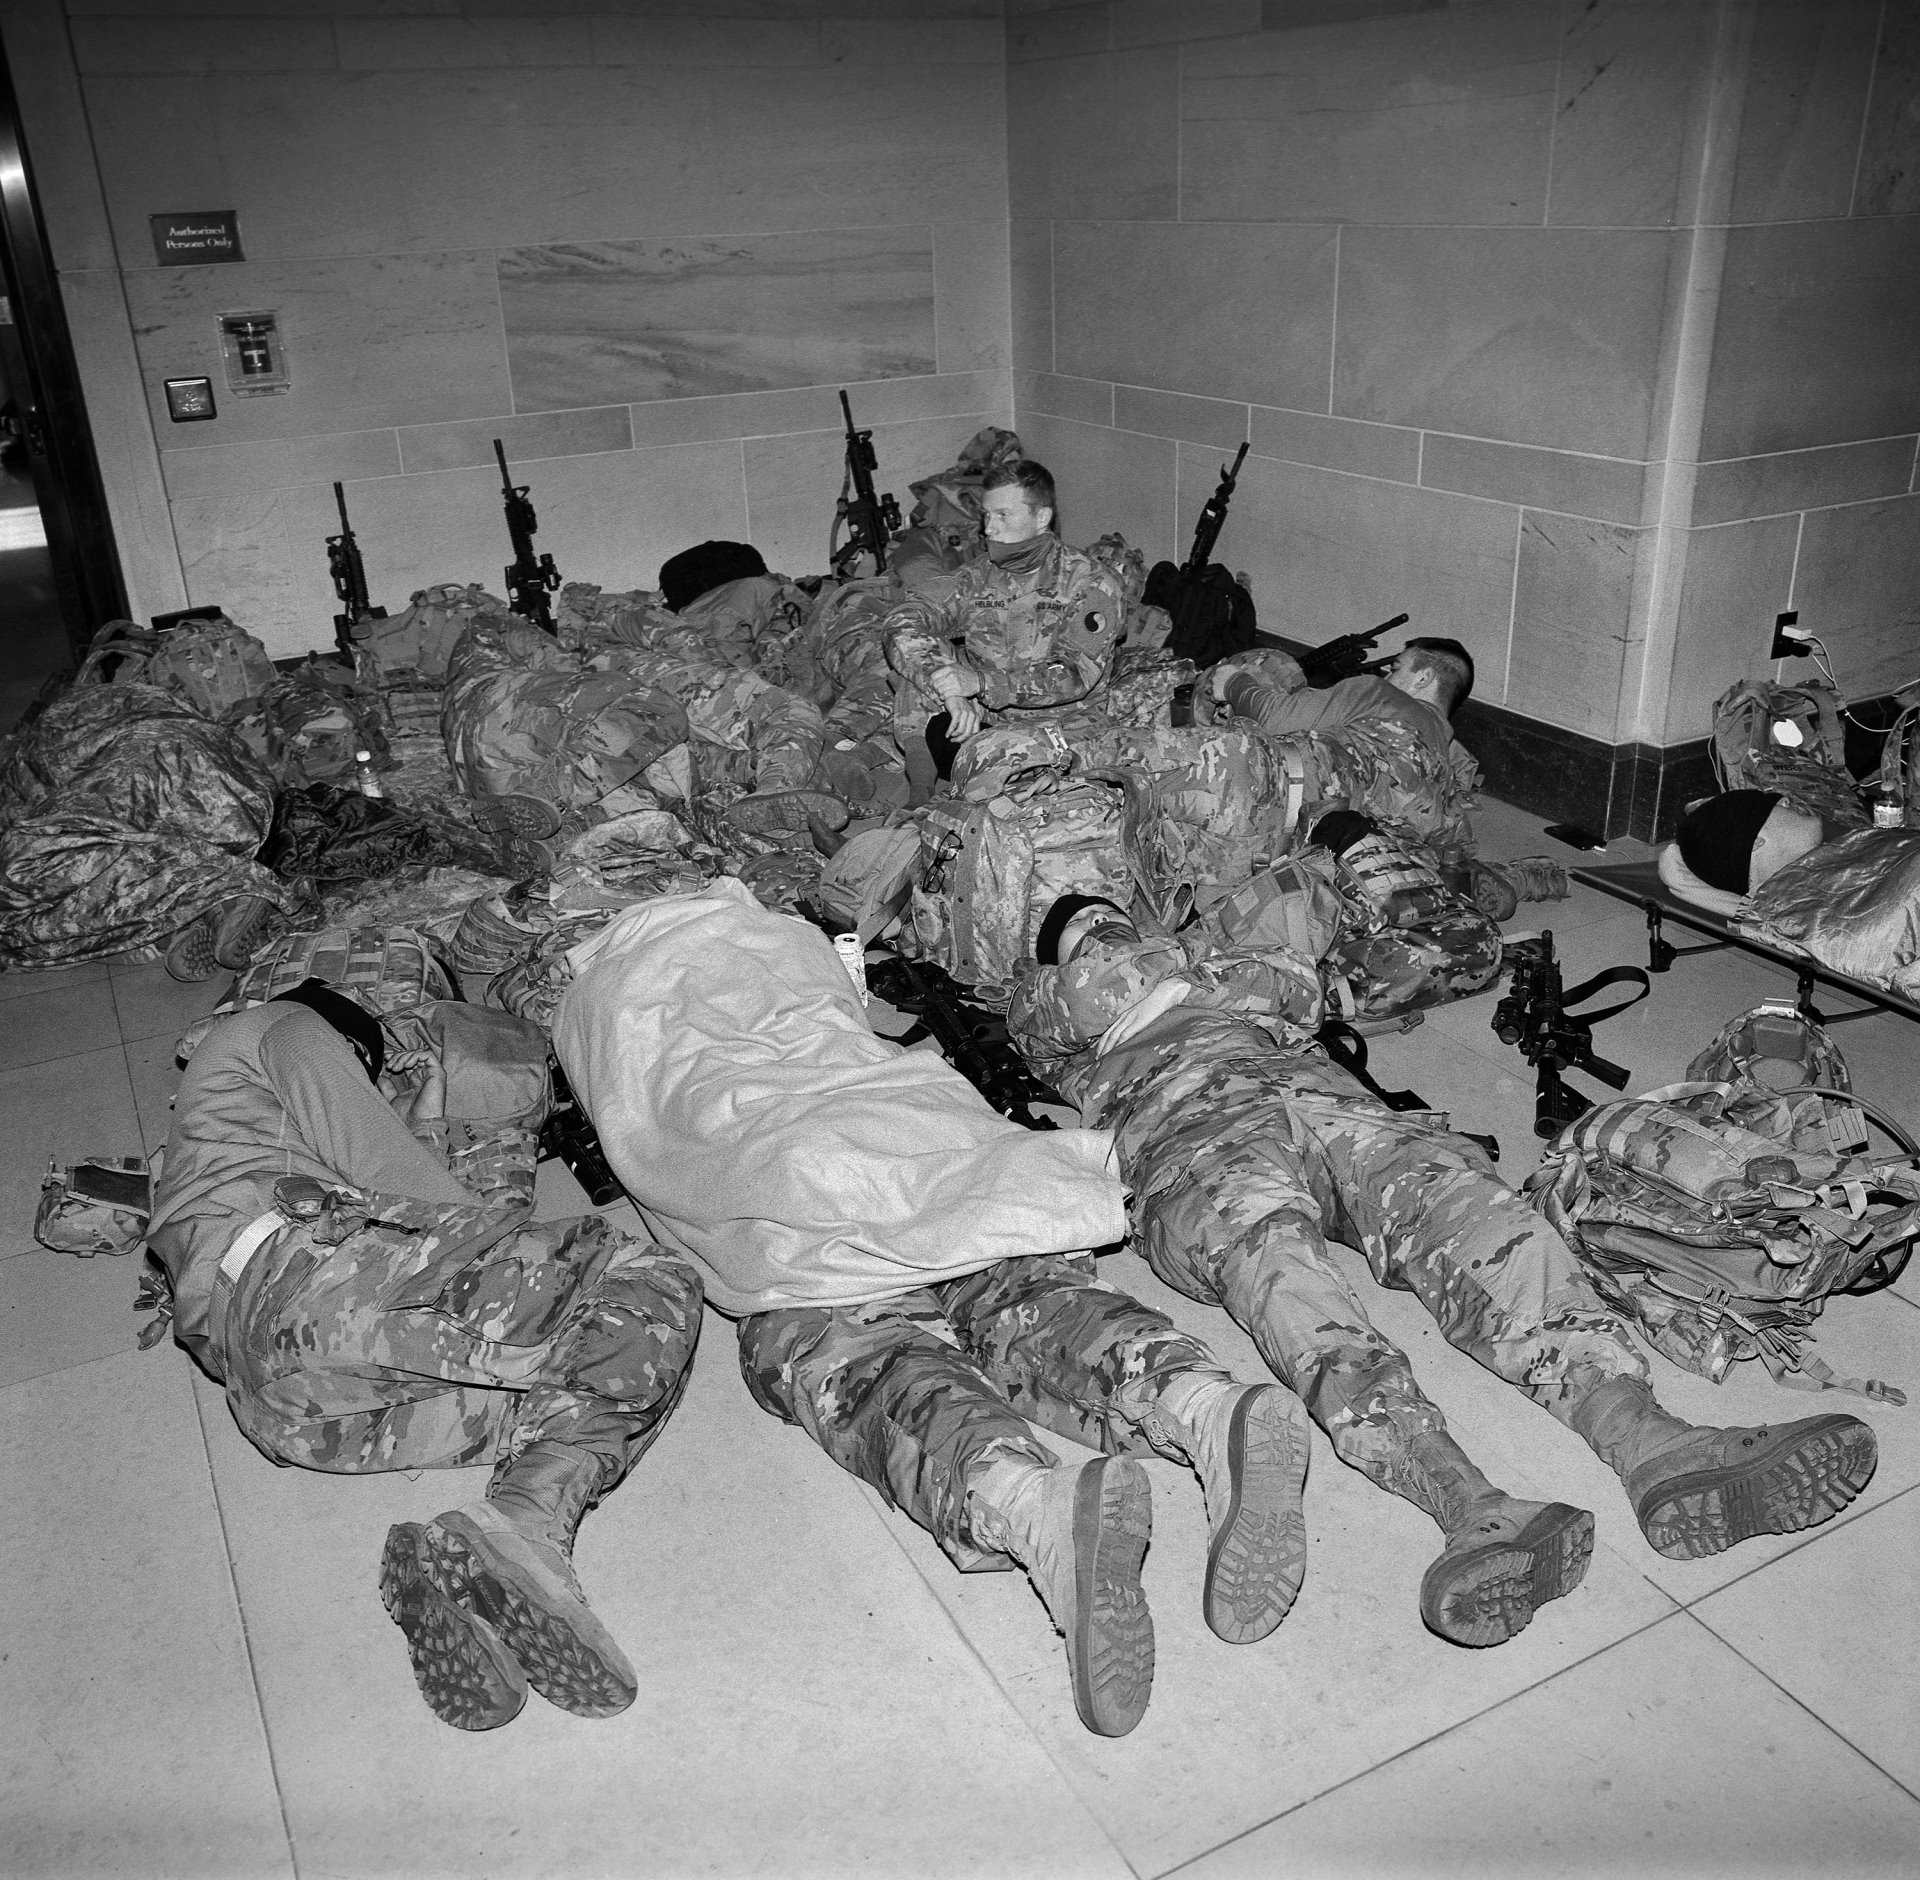 National Guard soldiers rest inside the Capitol Building, Washington DC, USA, on 7 January 2021. The troops were called on following the 6 January invasion of the Capitol Building to protect lawmakers and the complex from further attack, and remained deployed until 24 May.